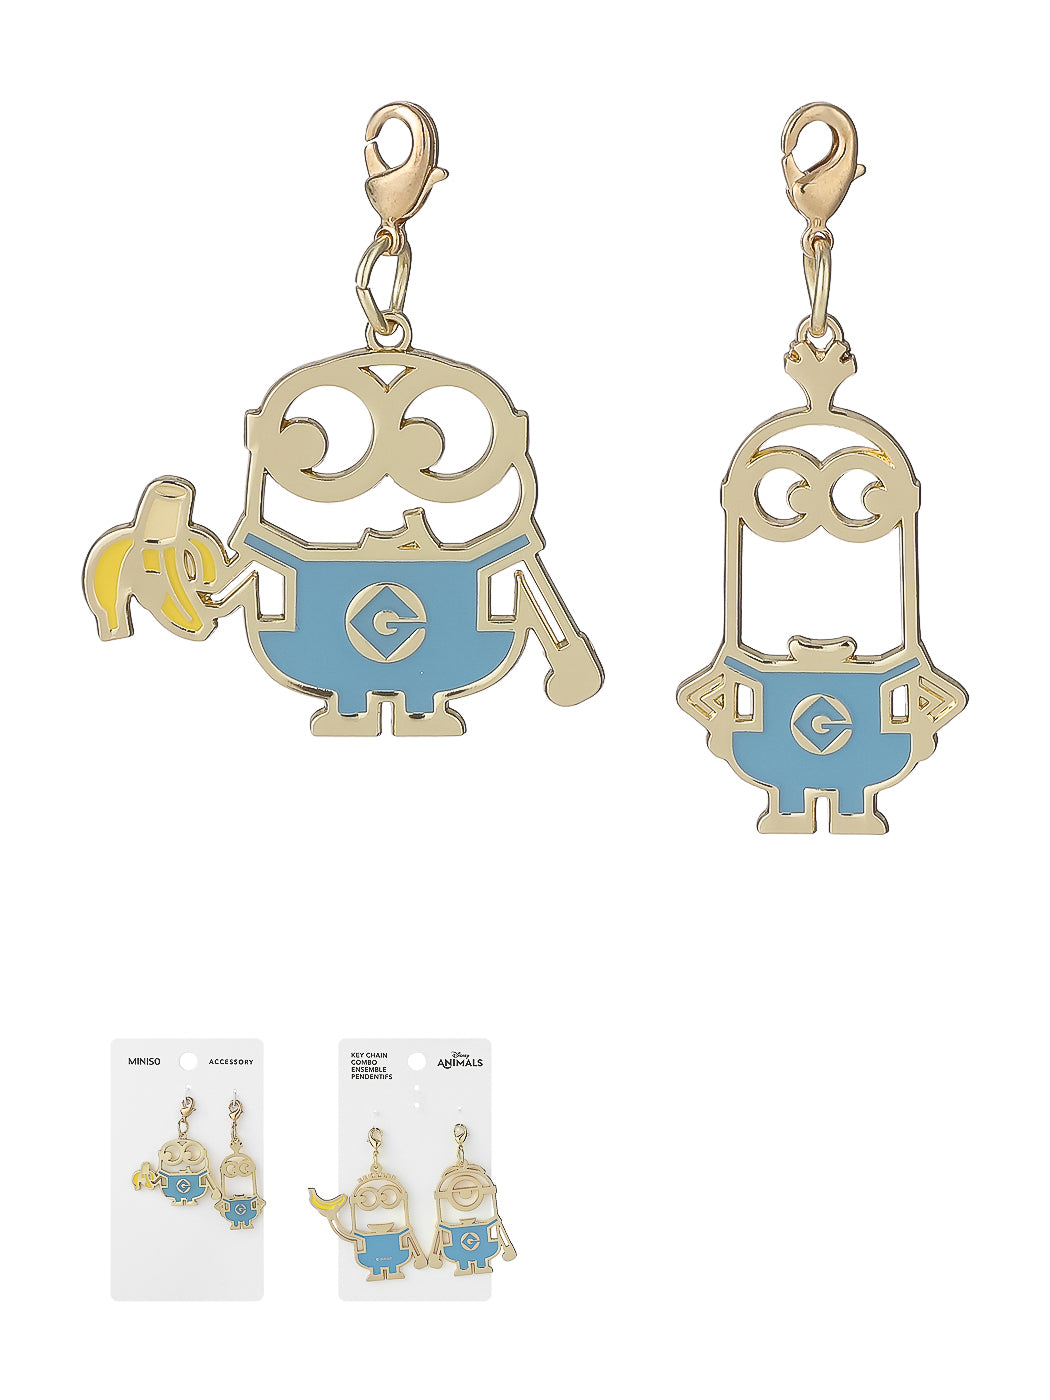 MINISO MINIONS COLLECTION HOLLOWED-OUT KEY CHAIN 2010615410109 FASHIONABLE ORNAMENTS